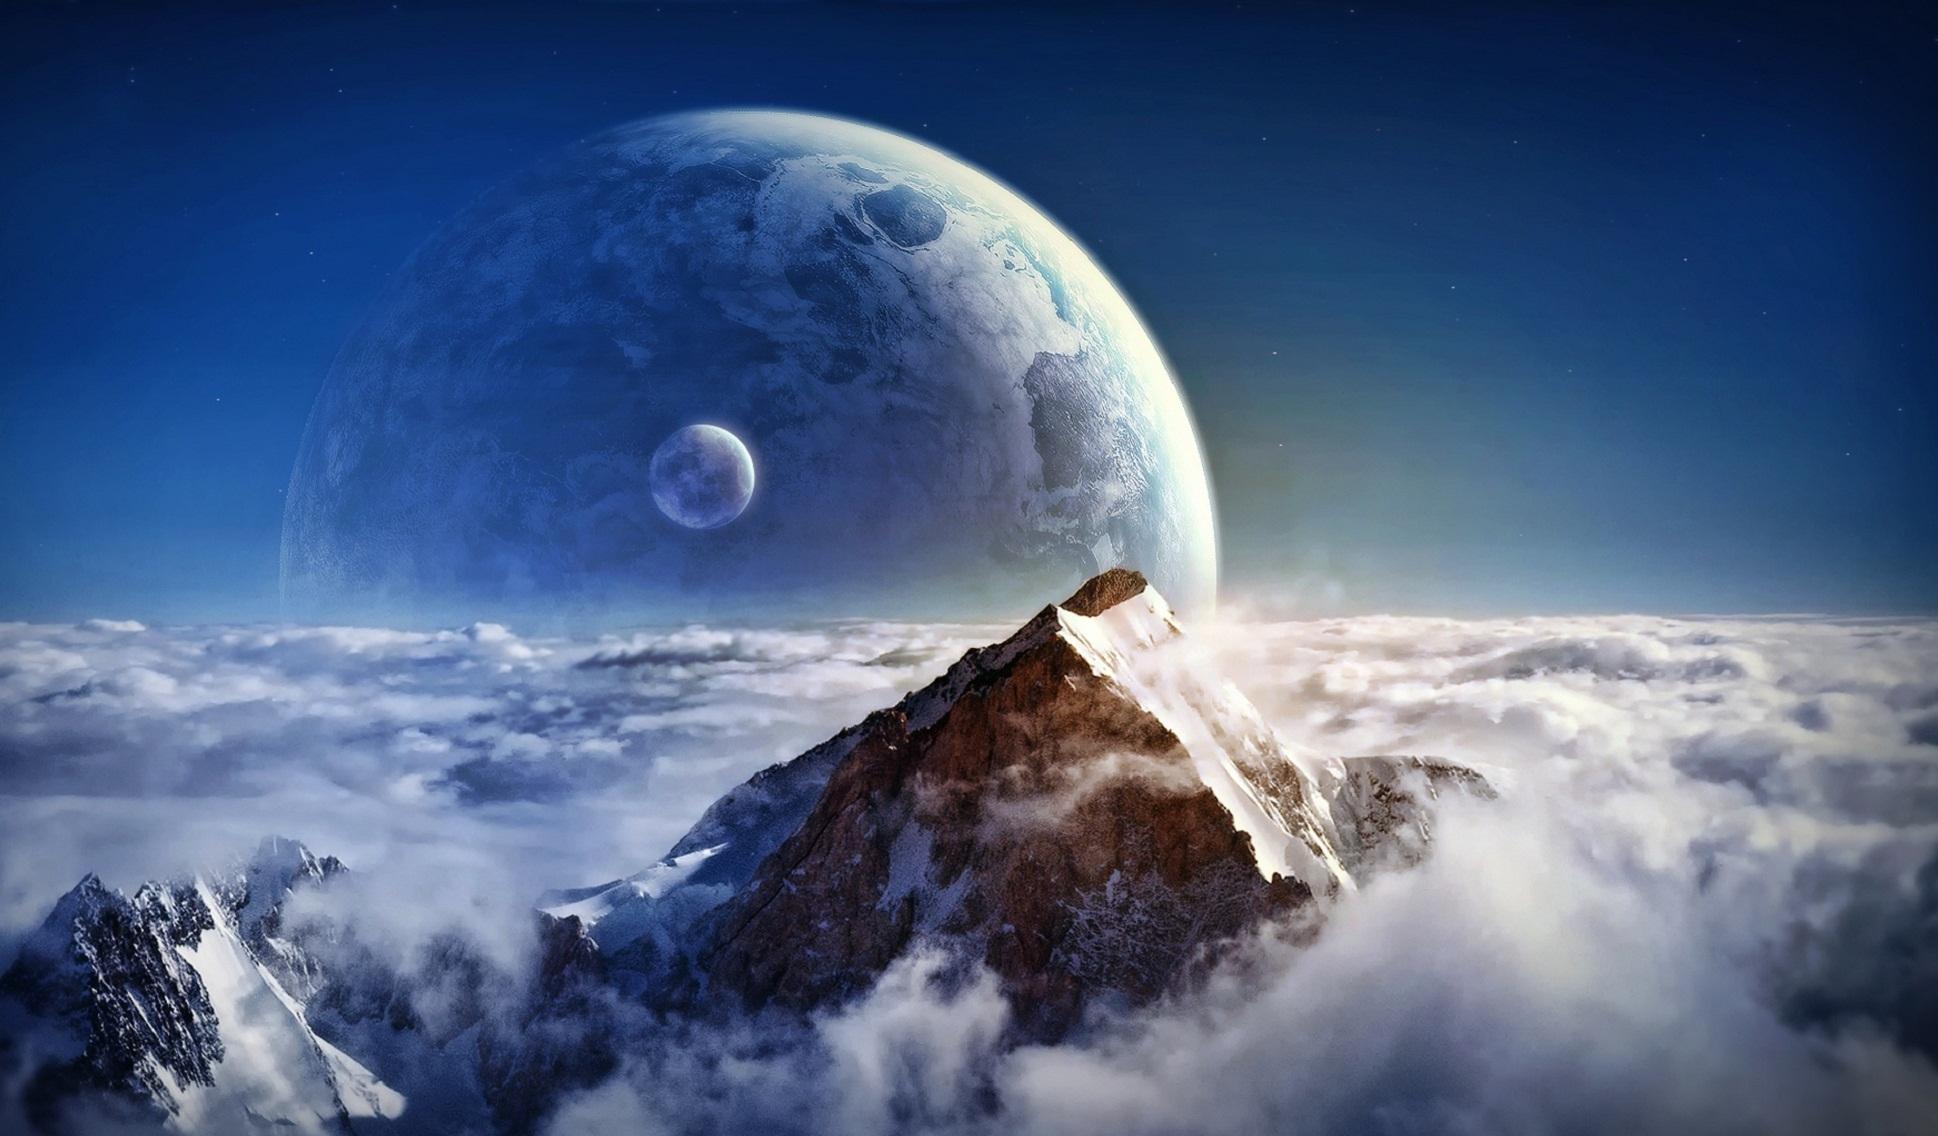 Alien Worlds Live Wallpaper Live Backgrounds For Android Apk Download